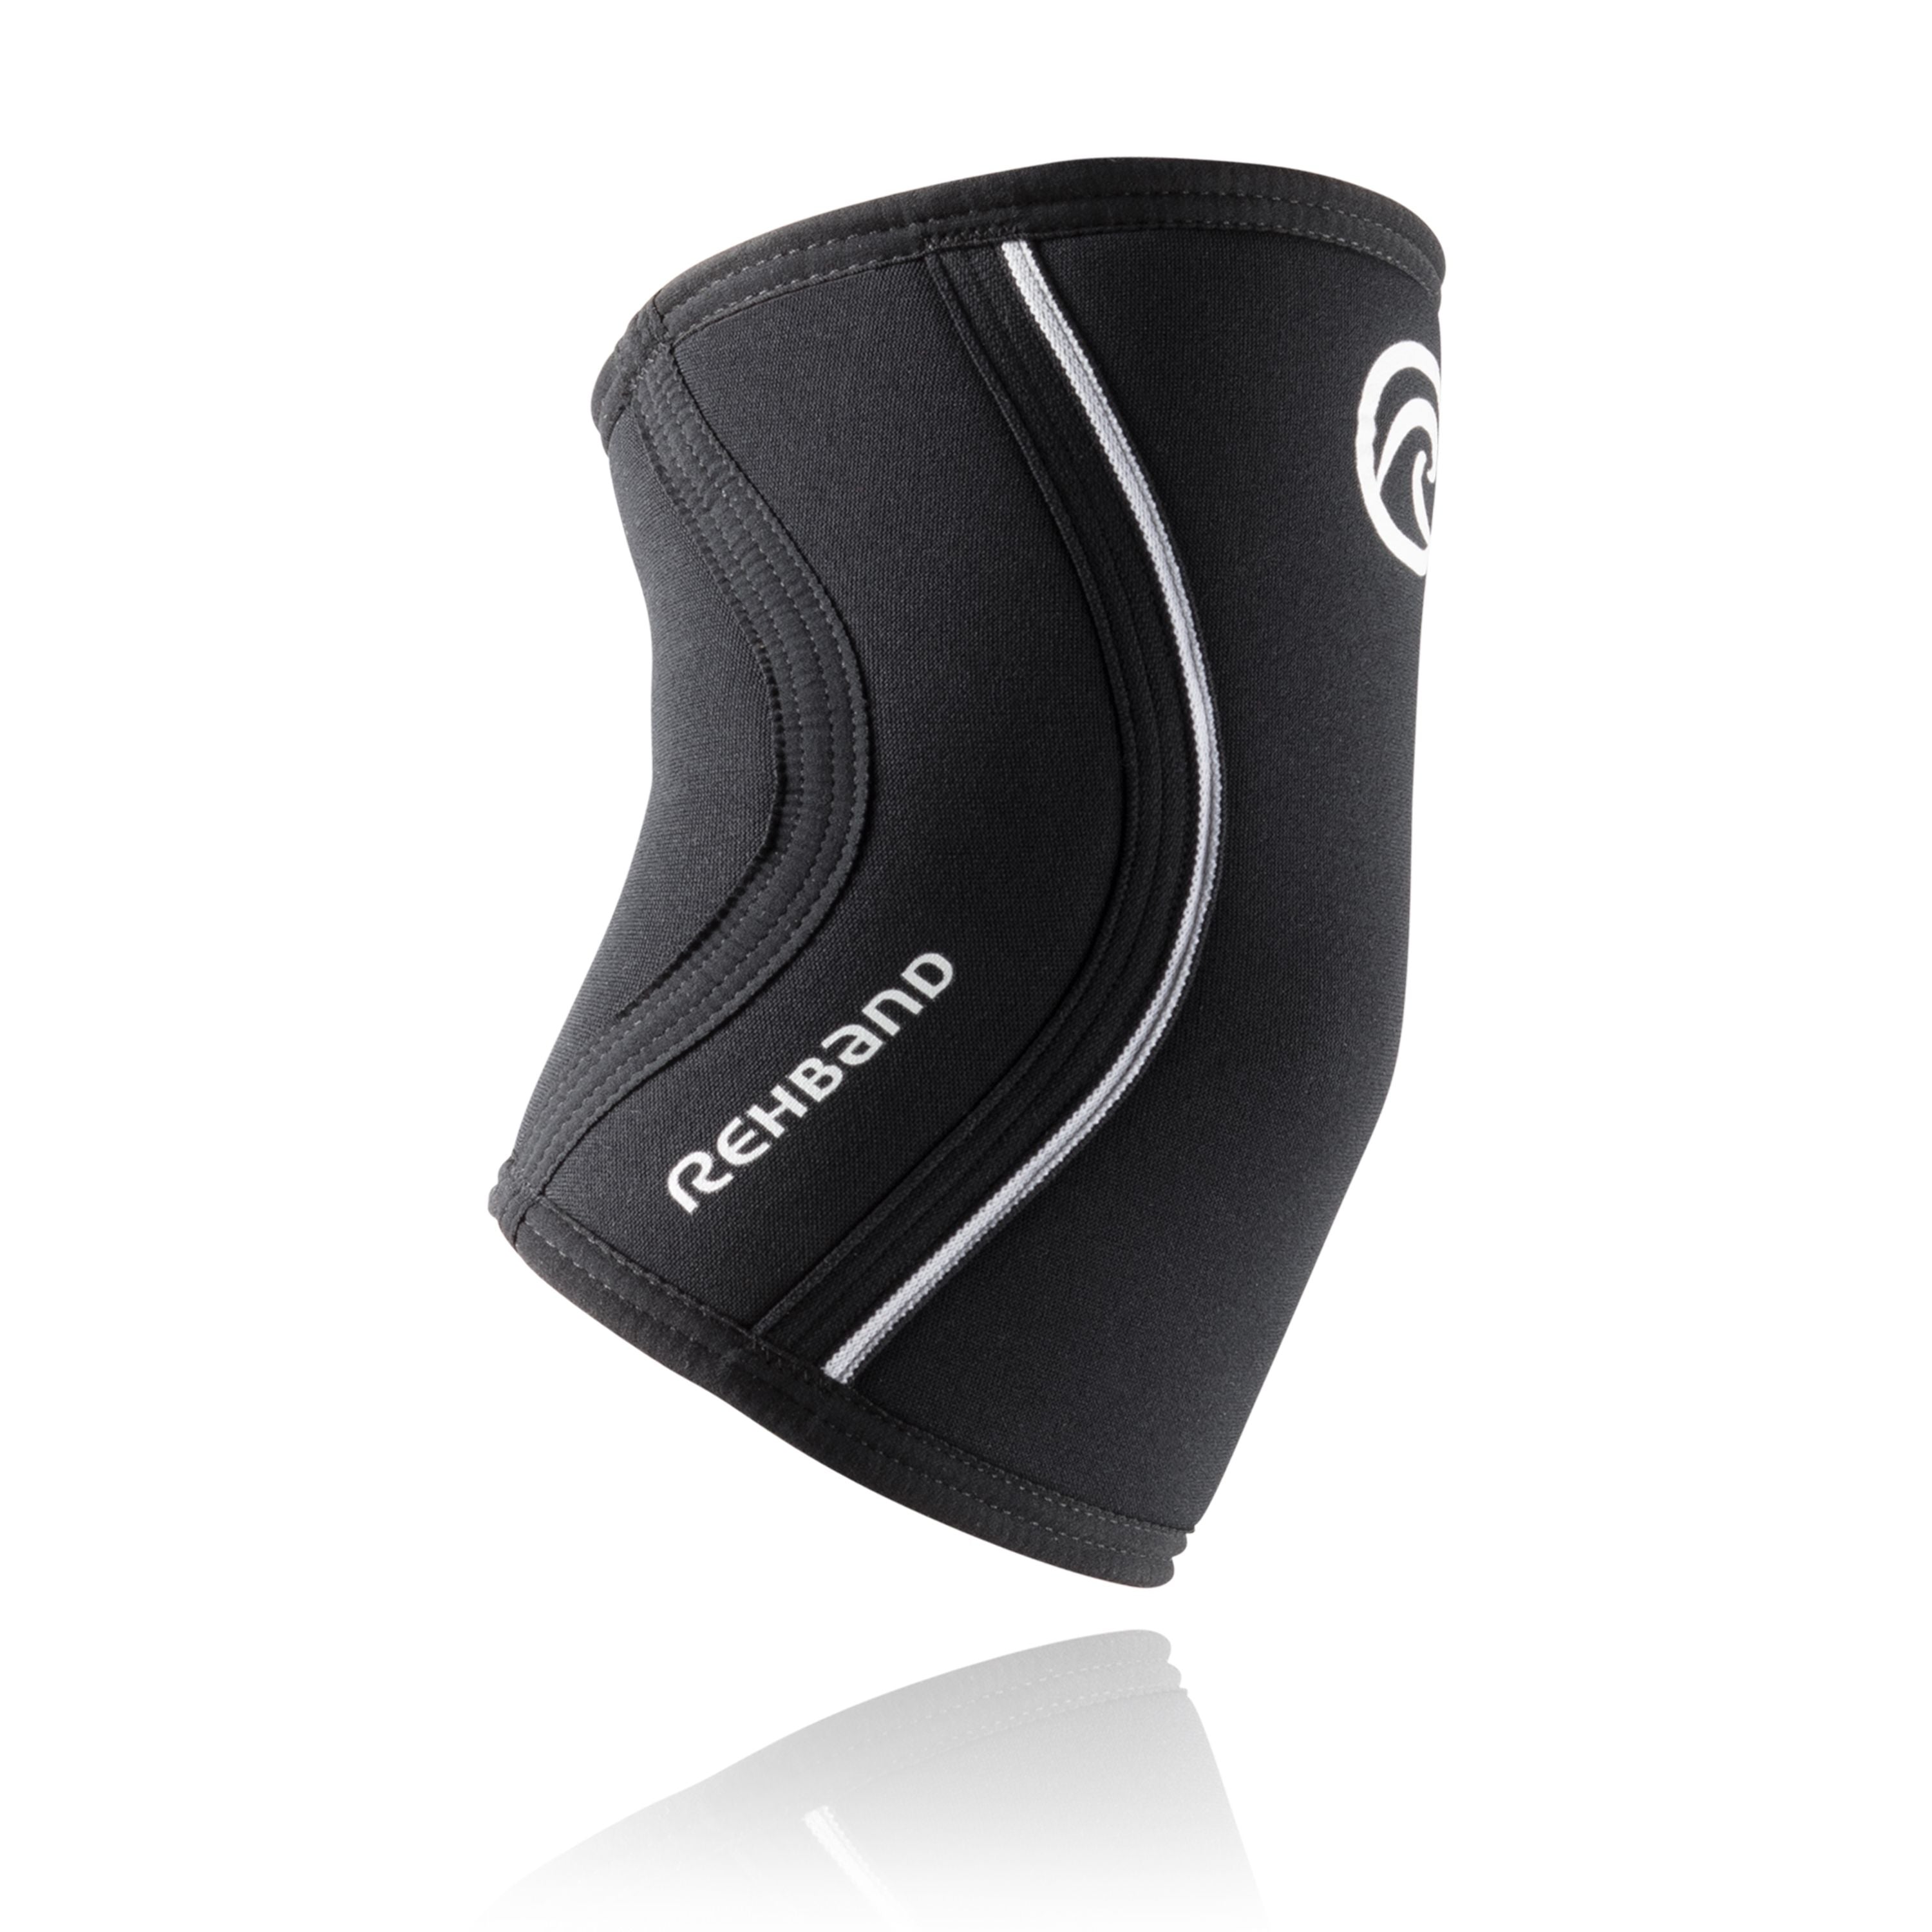 Rx Elbow Sleeve 5mm - Black (Single) from Rehband for Genejack WOD